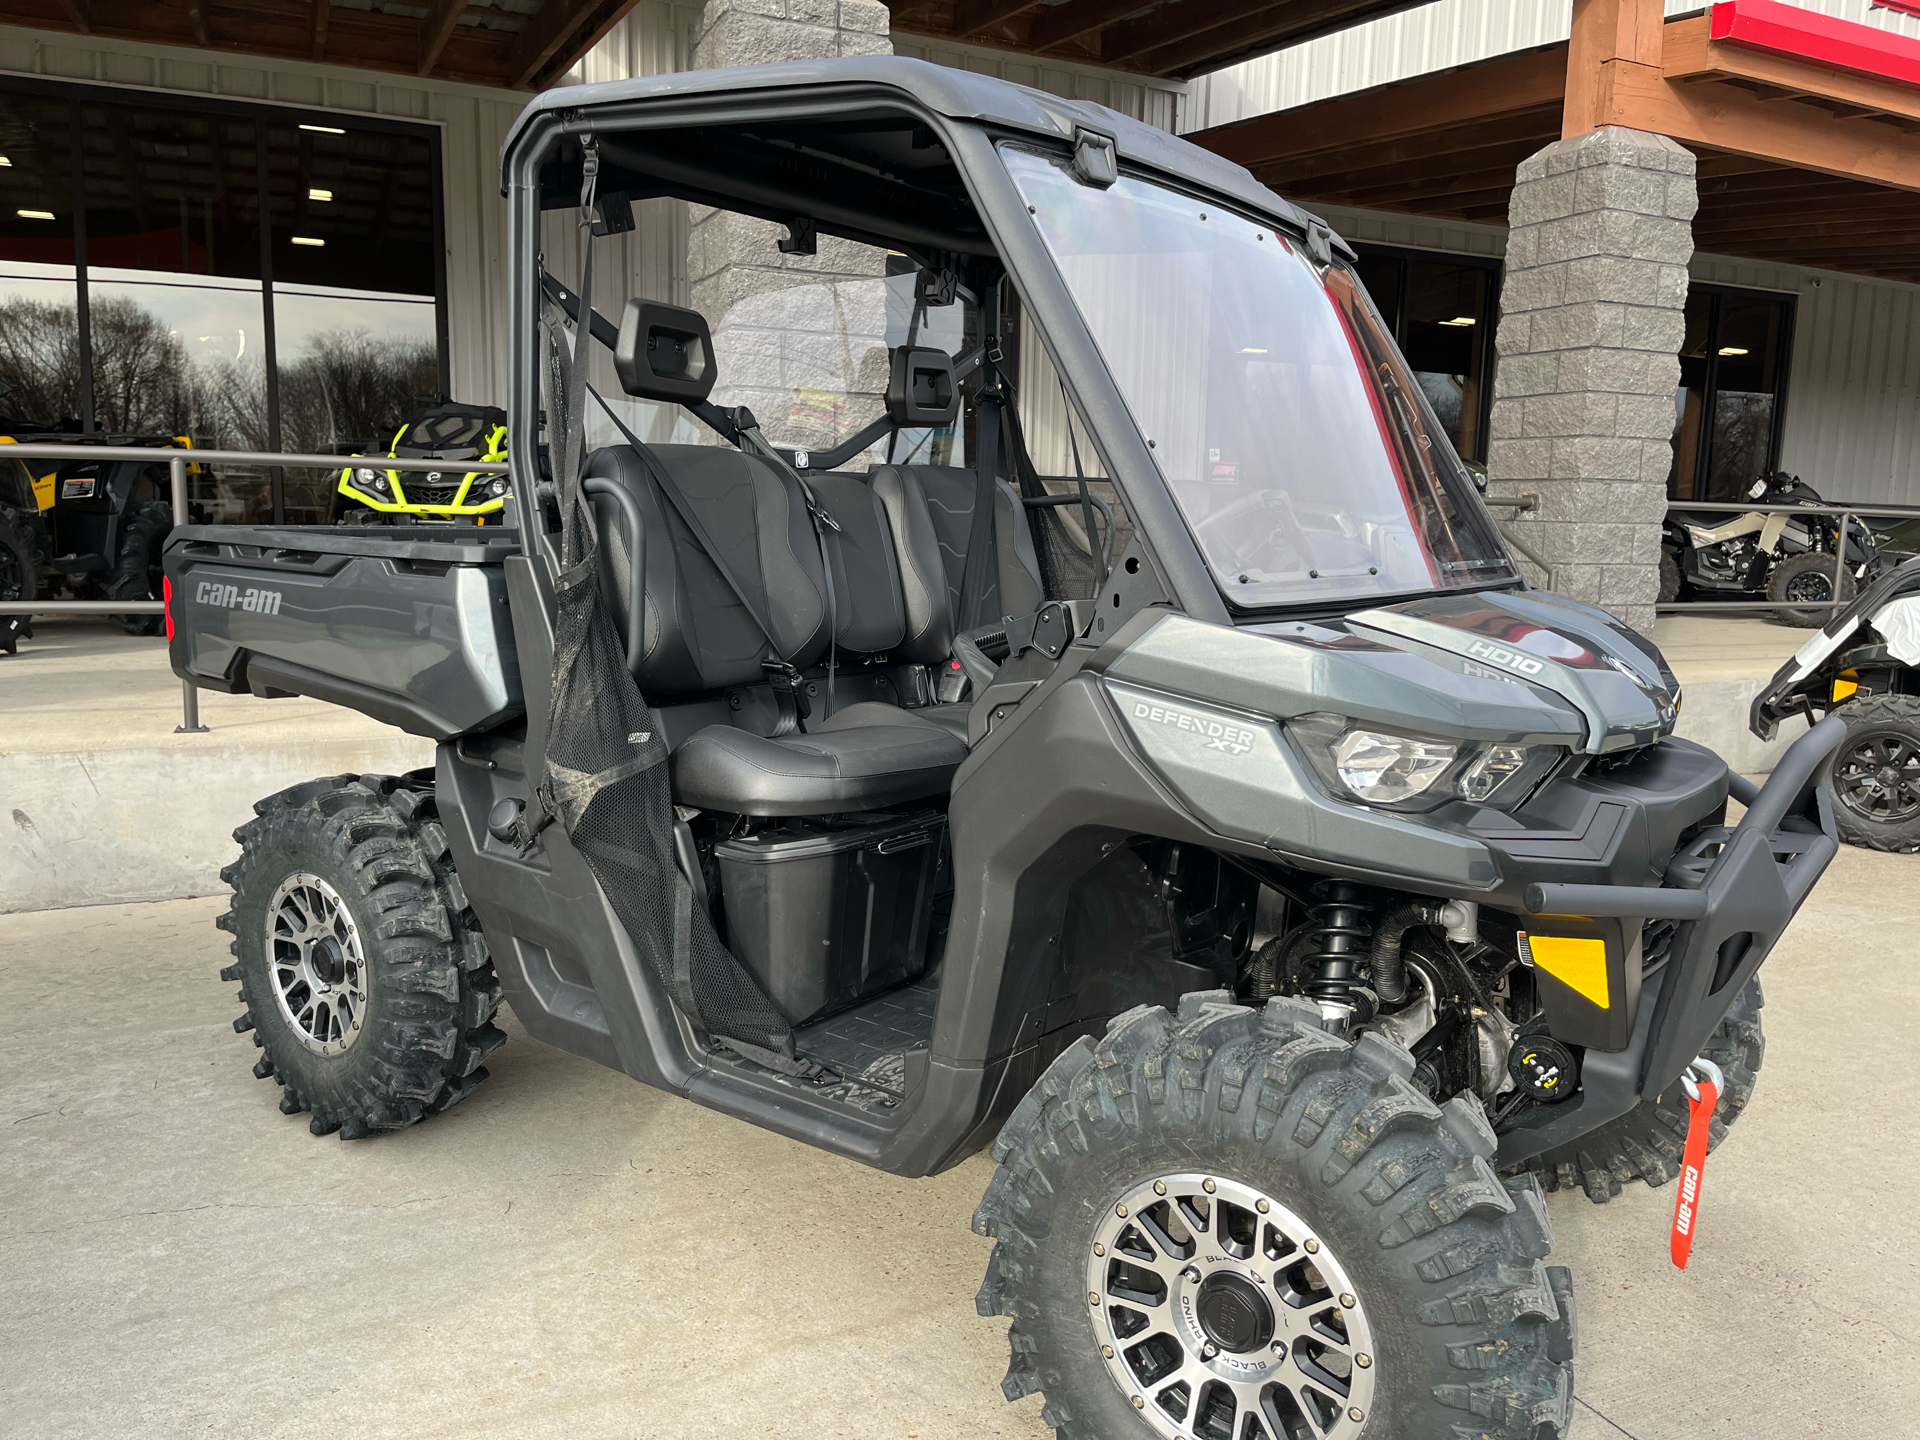 2023 Can-Am Defender XT HD10 in Leland, Mississippi - Photo 2